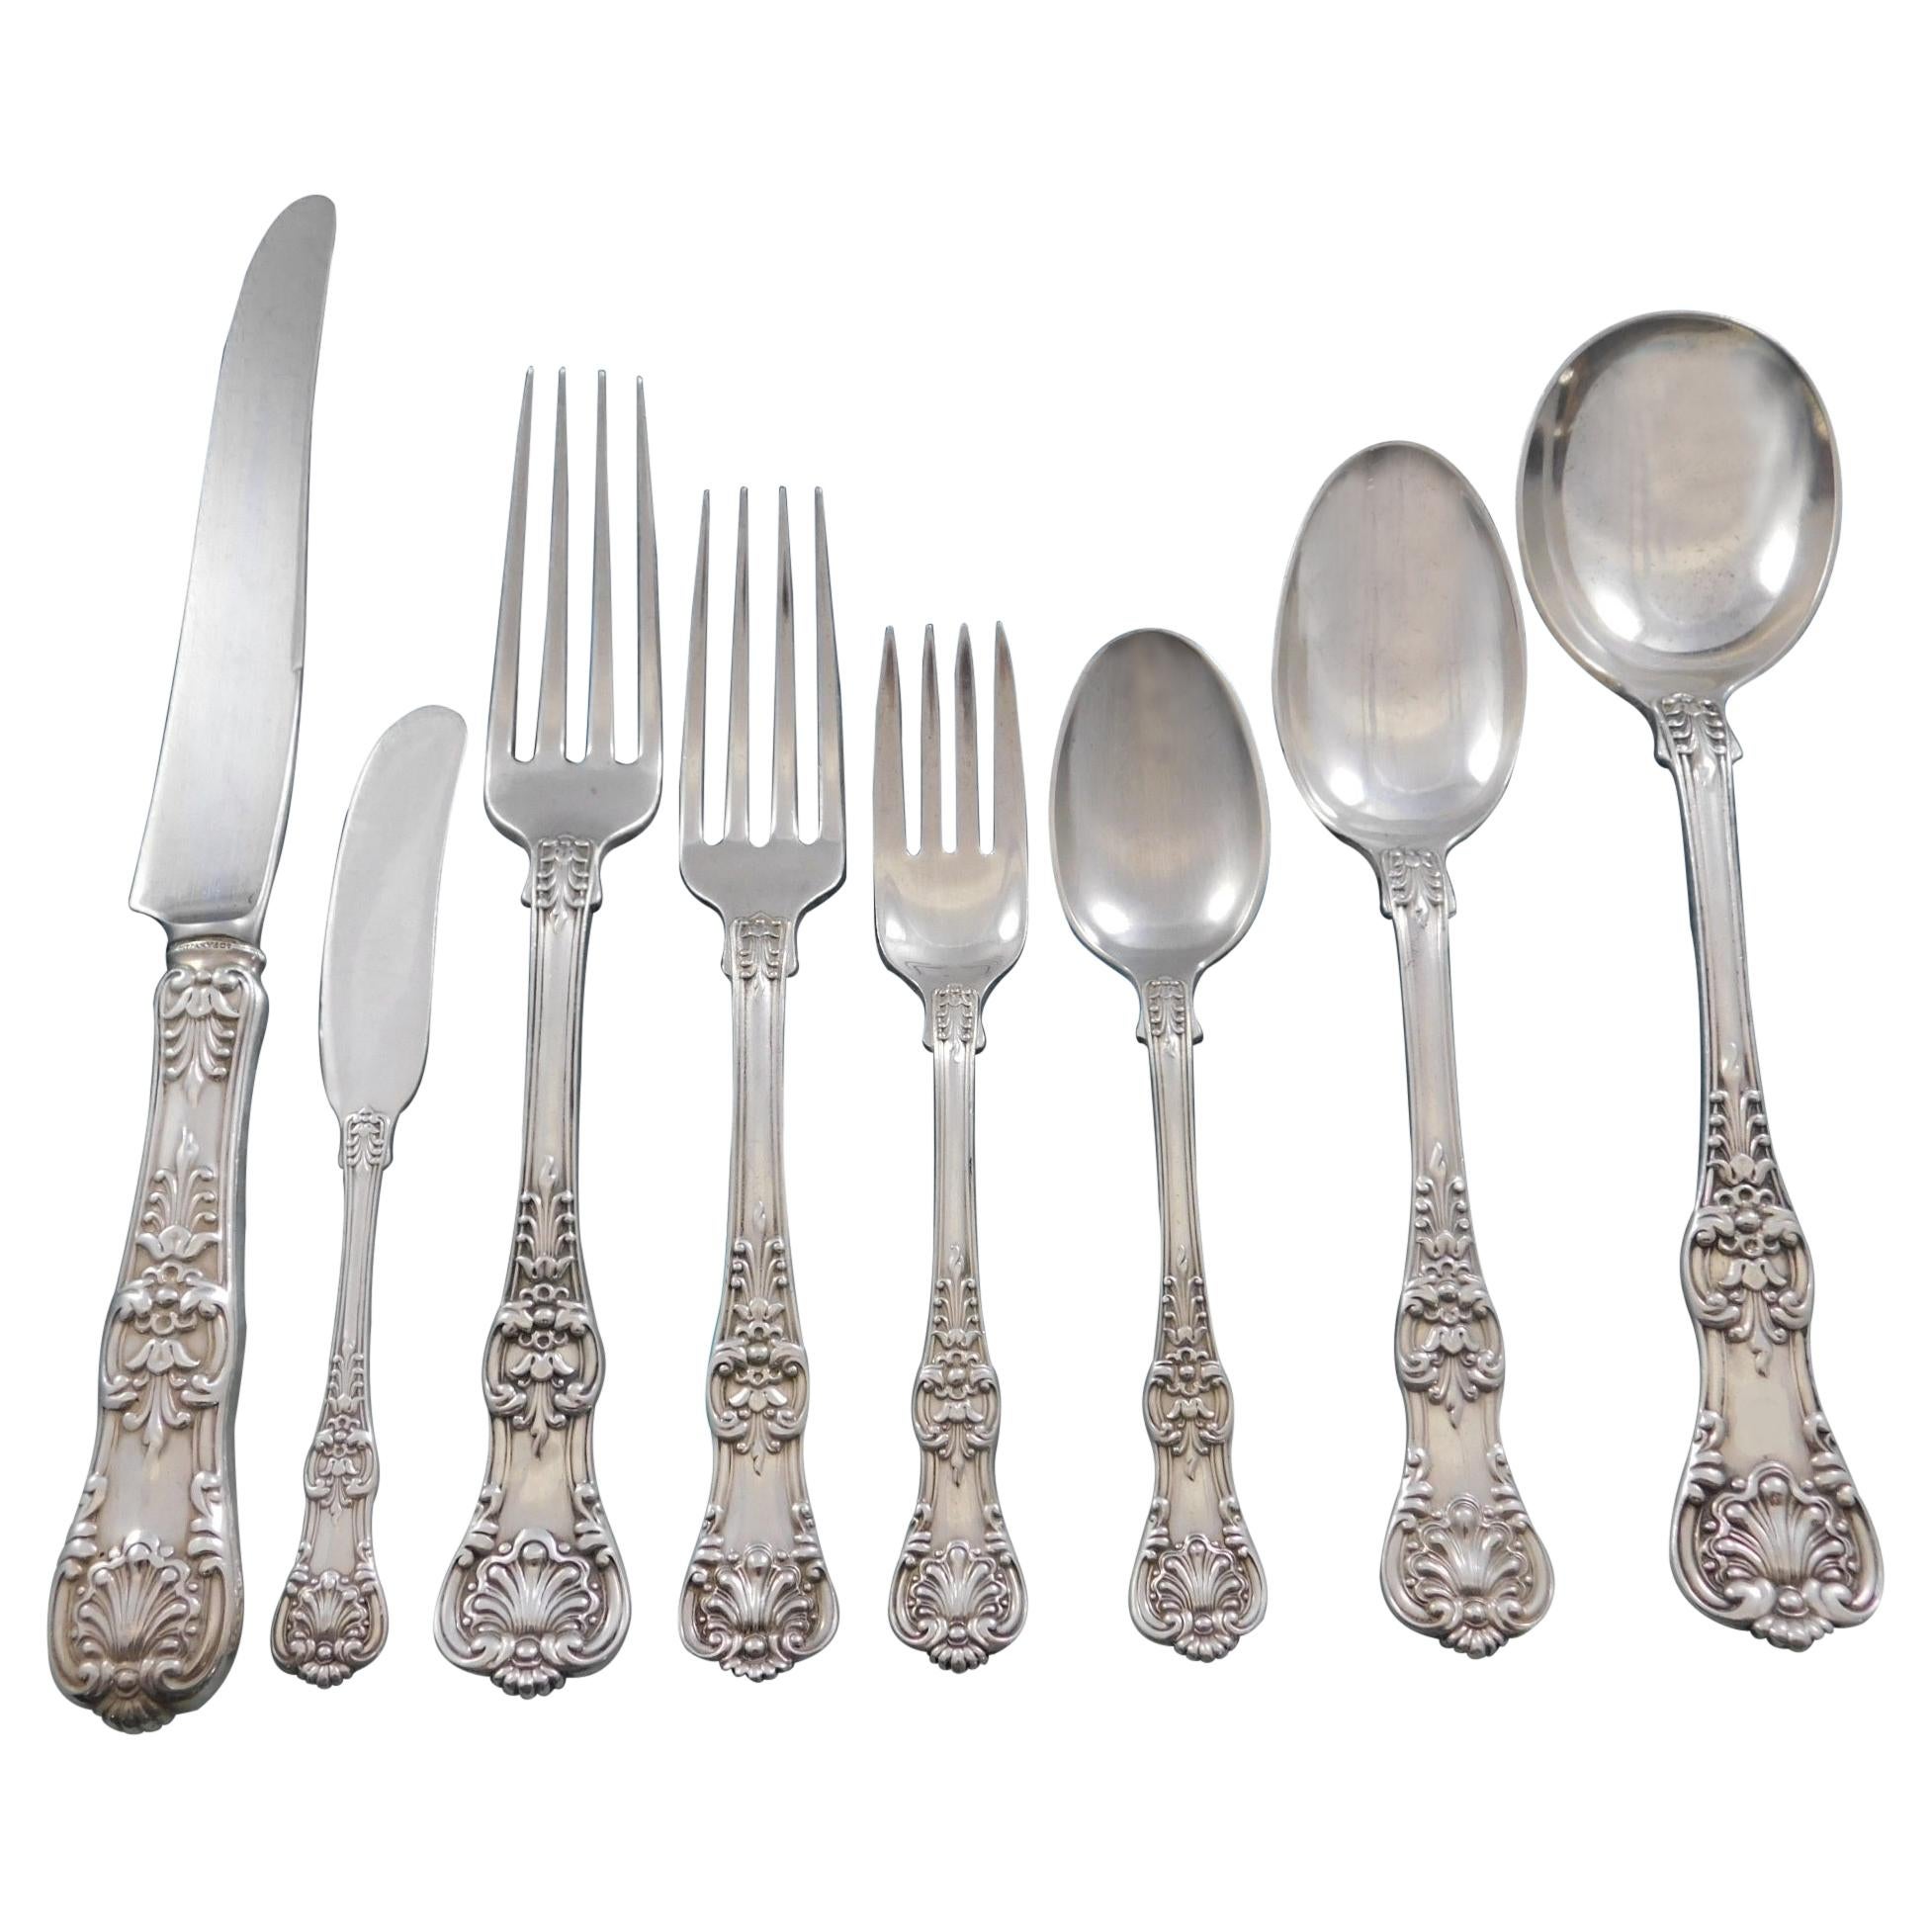 English King by Tiffany & Co Sterling Silver Flatware Set Service 106 Pcs Dinner